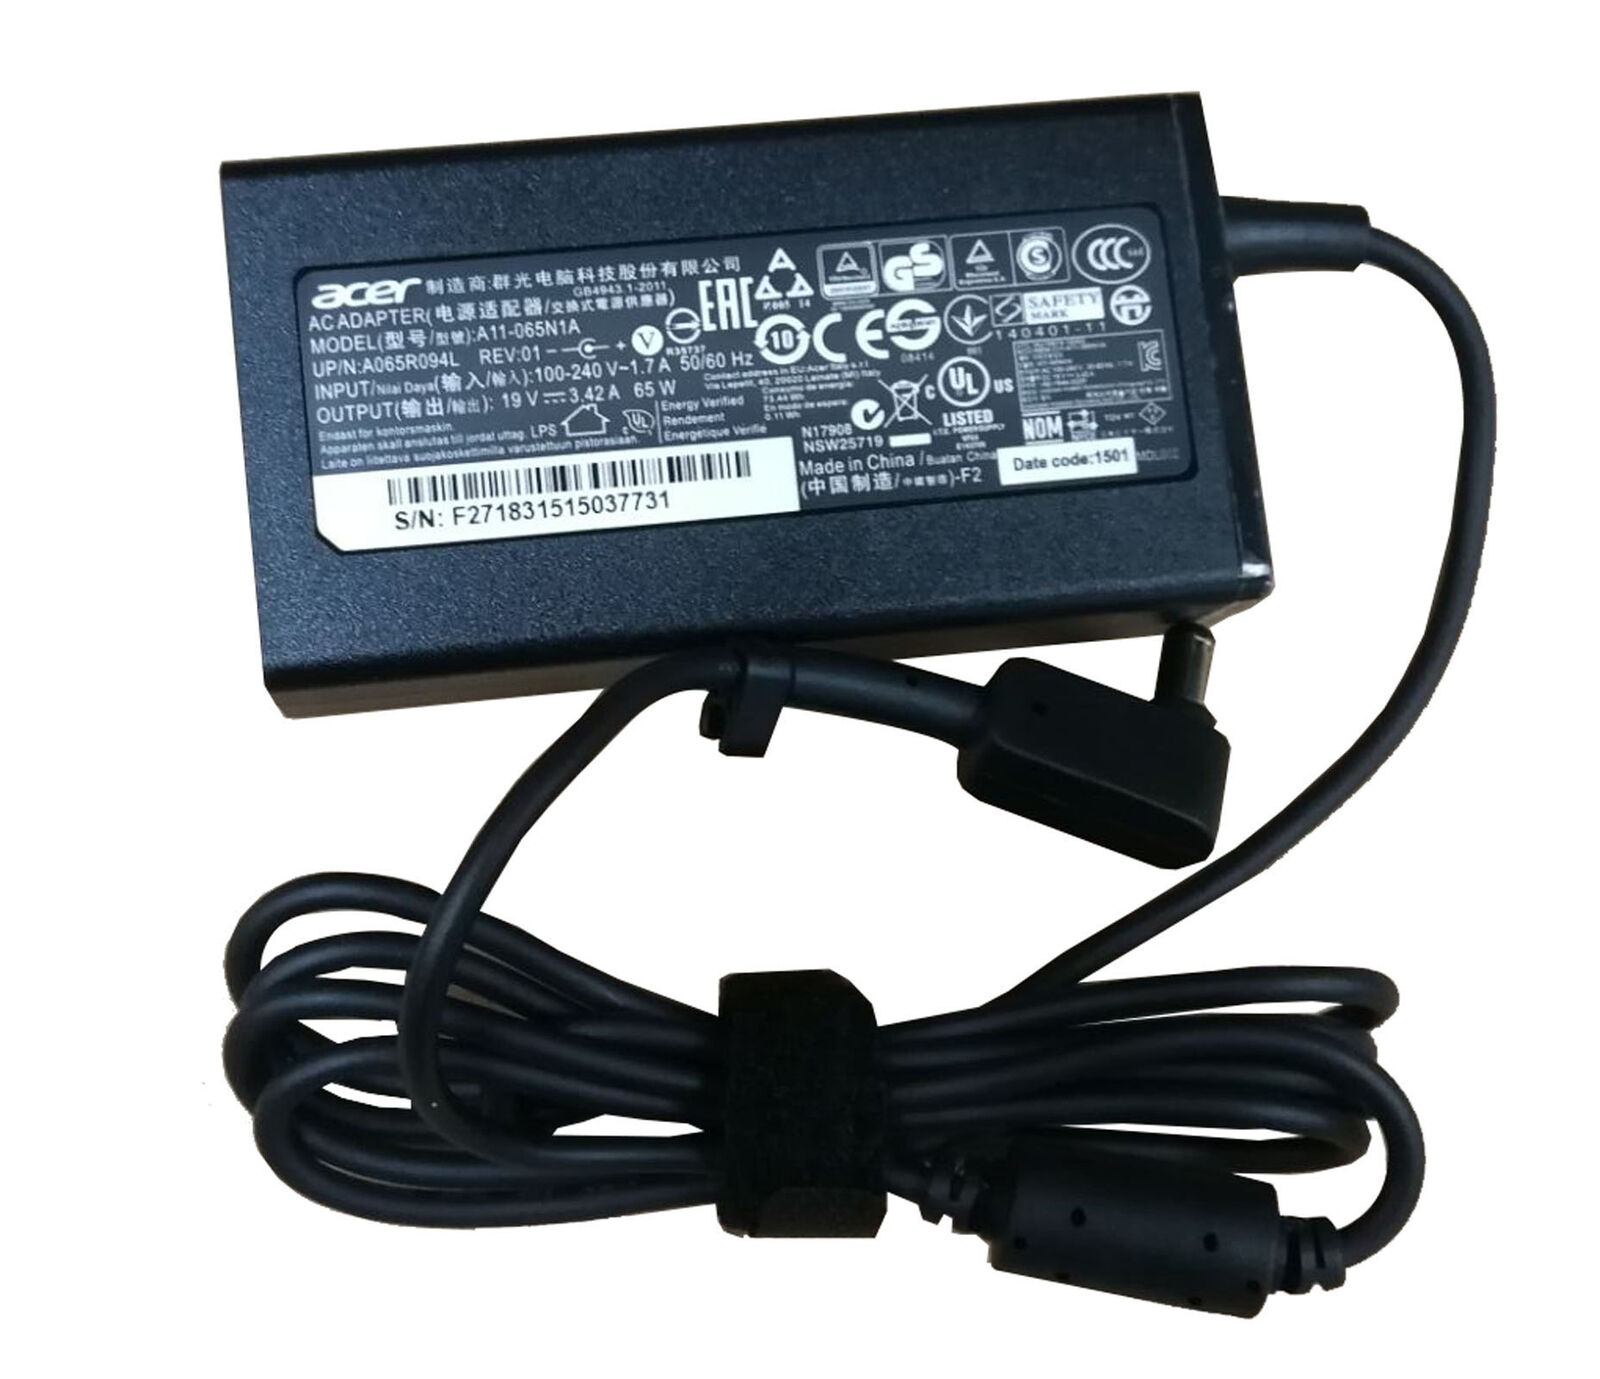 65W Acer Chromebook CB5-311-T5X0 Charger AC Adapter Power Cord